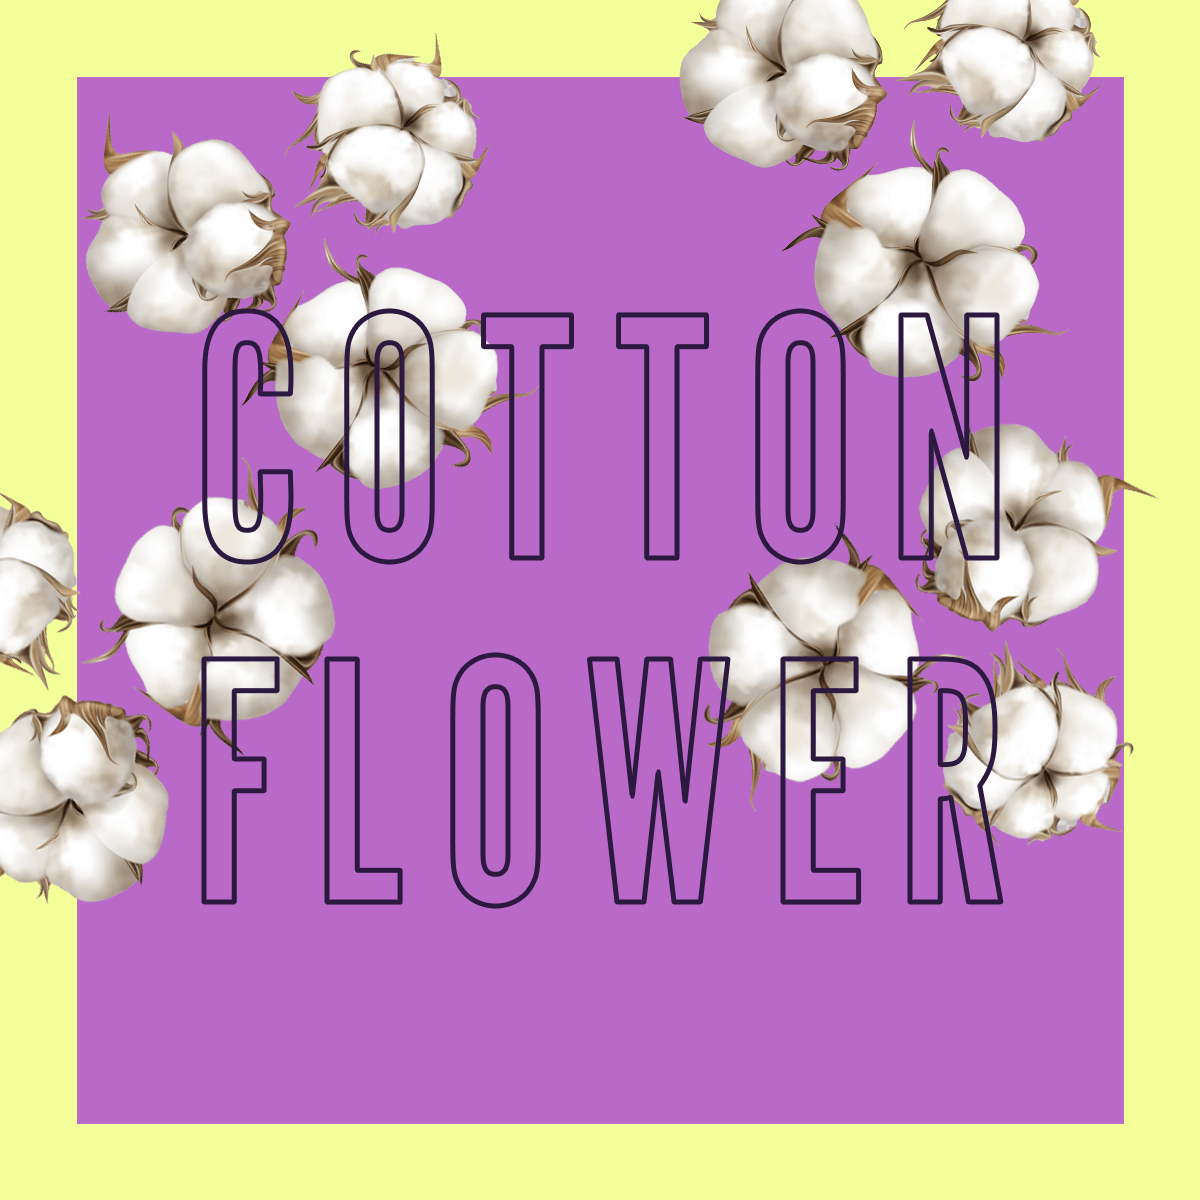 Limited Edition Cotton Flower Fragrance 2ml